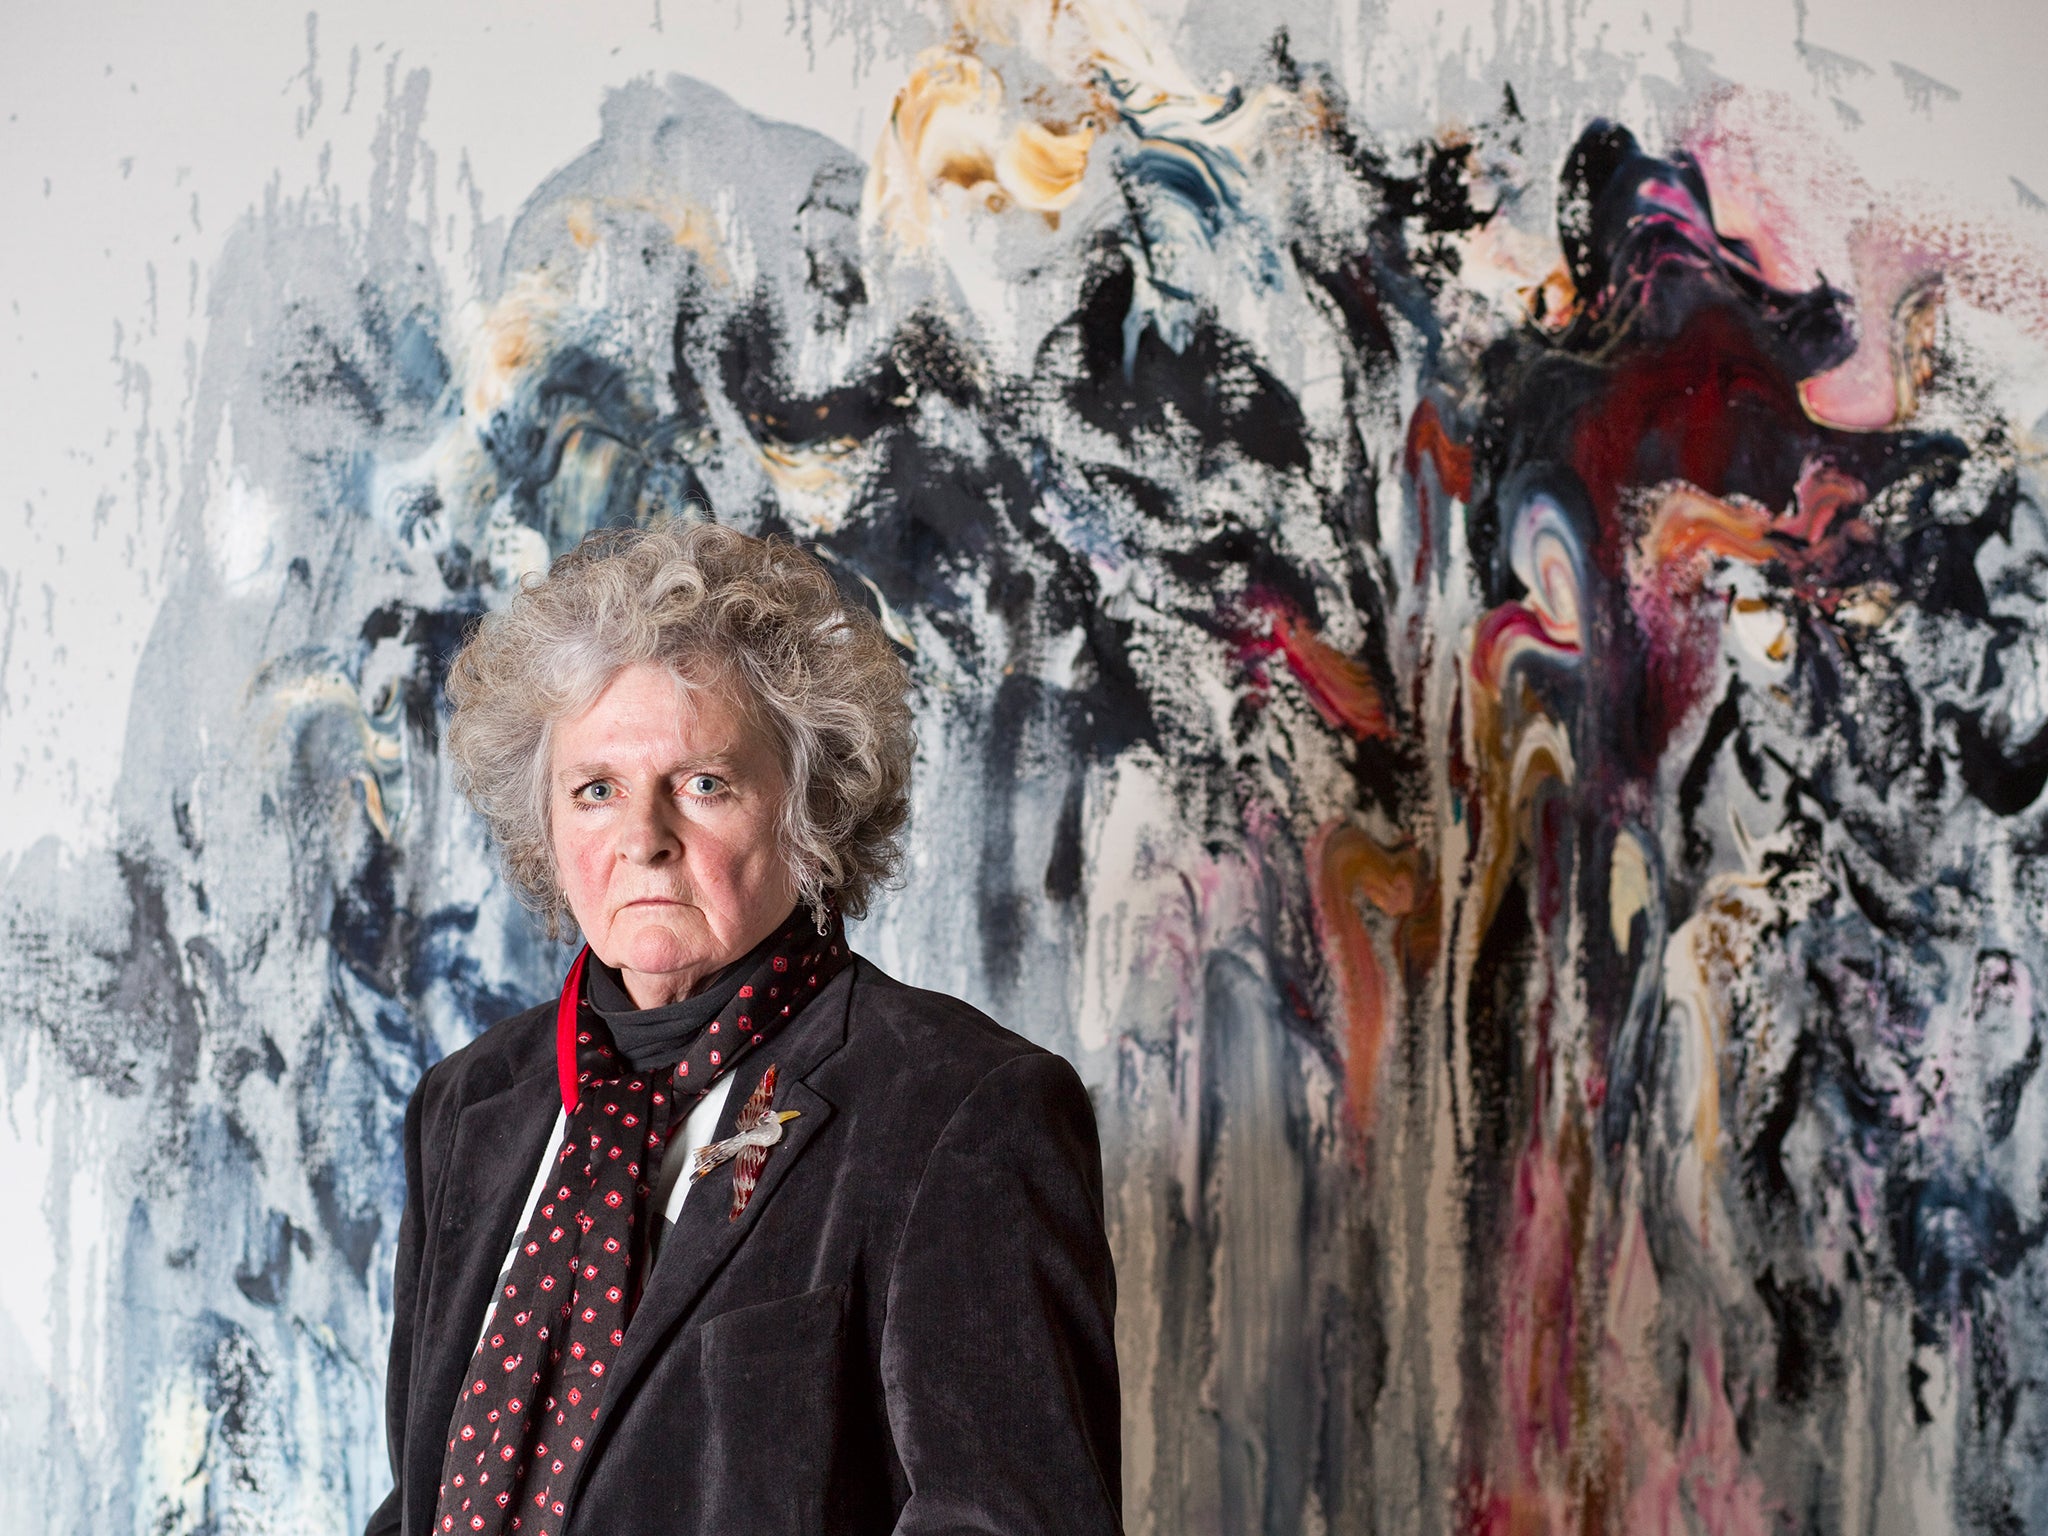 Maggi Hambling is one of Britain’s most celebrated – and divisive – contemporary artists